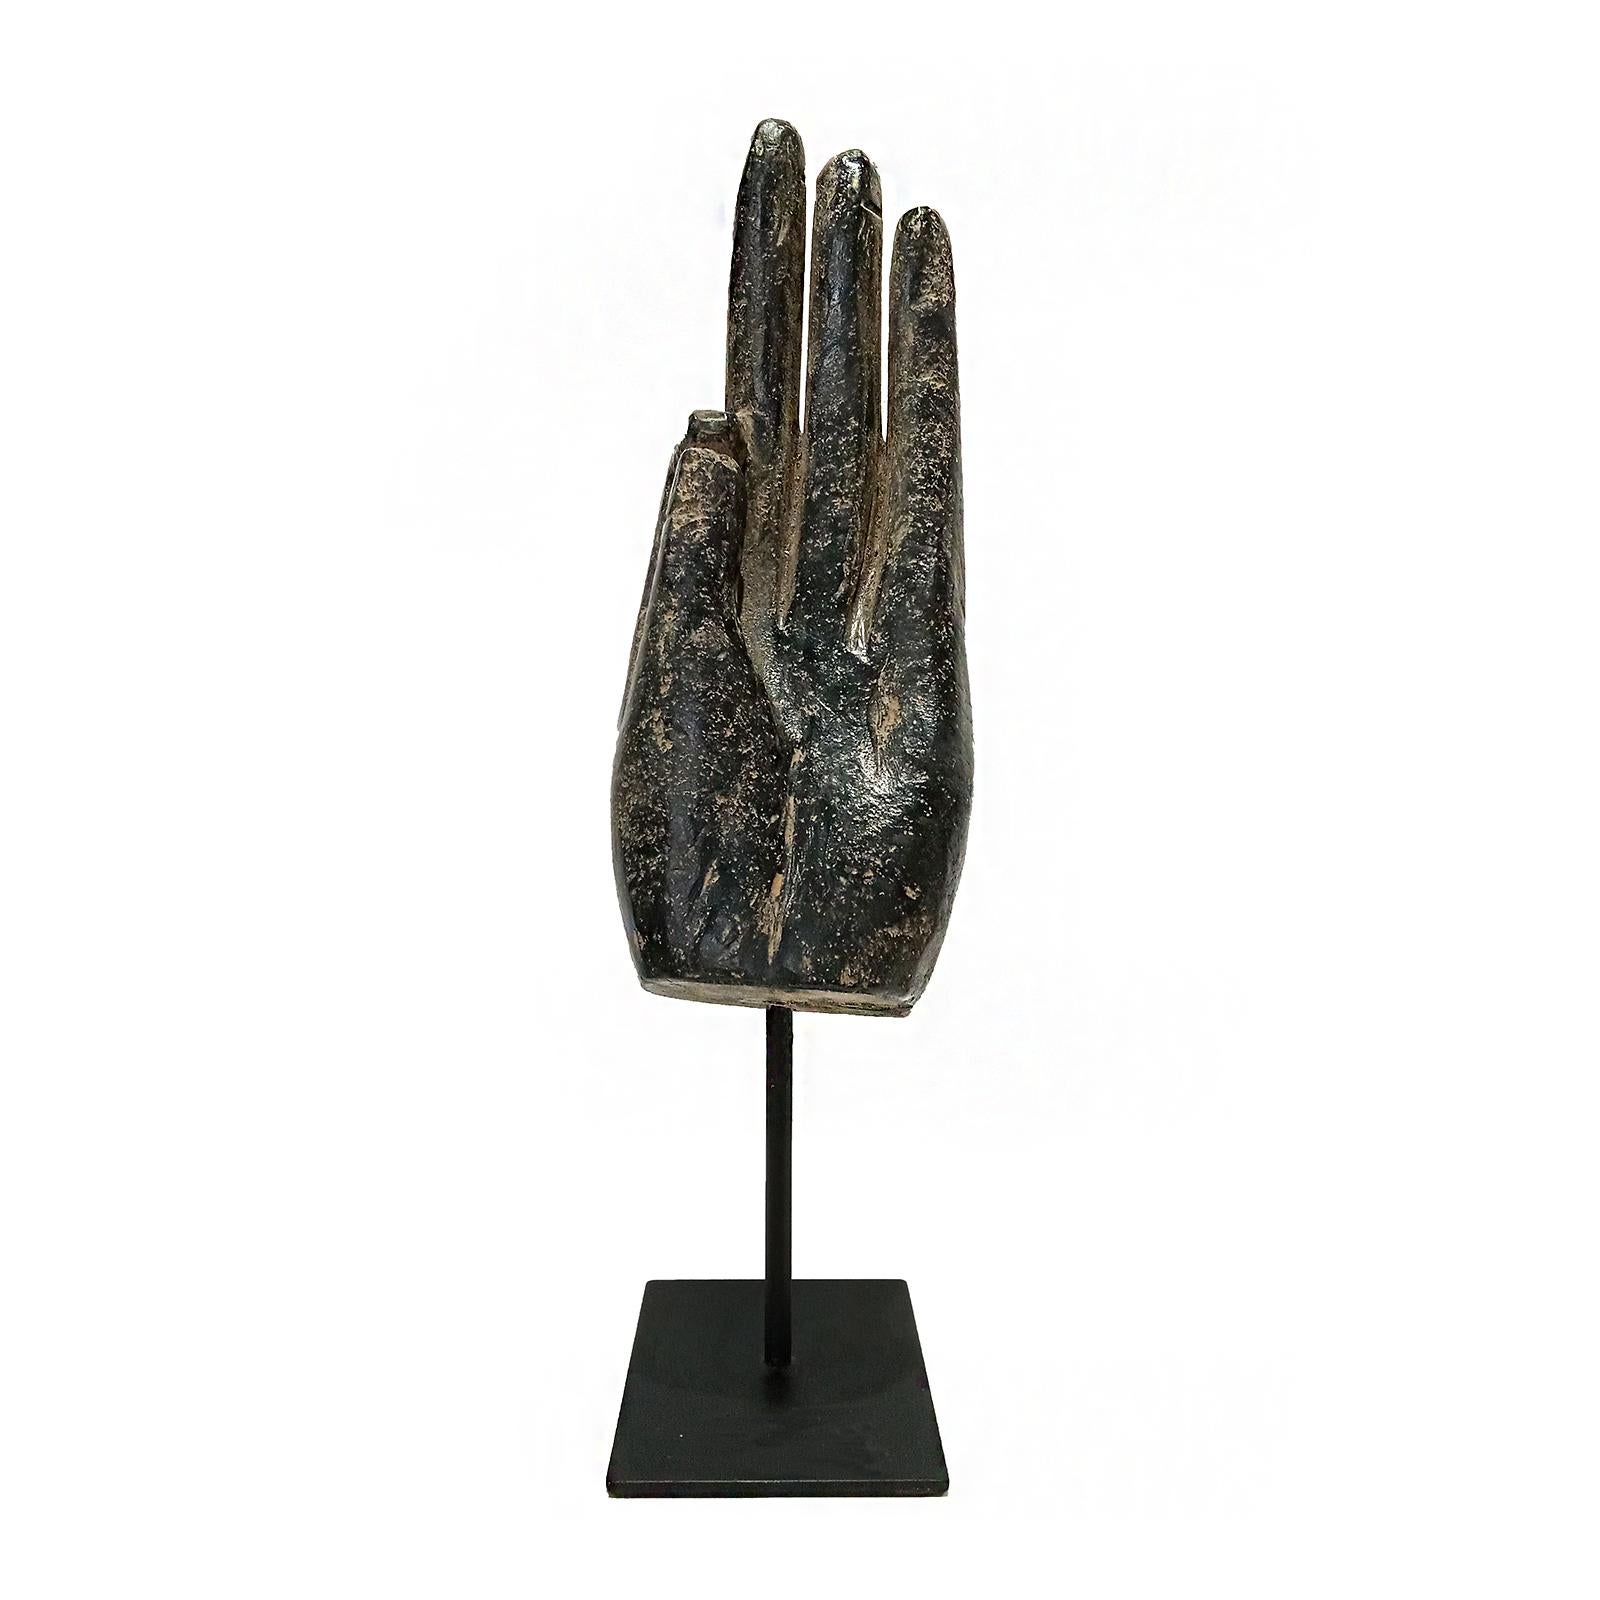 Three Volcanic Rock Hand Sculptures, Mid 20th Century For Sale 5